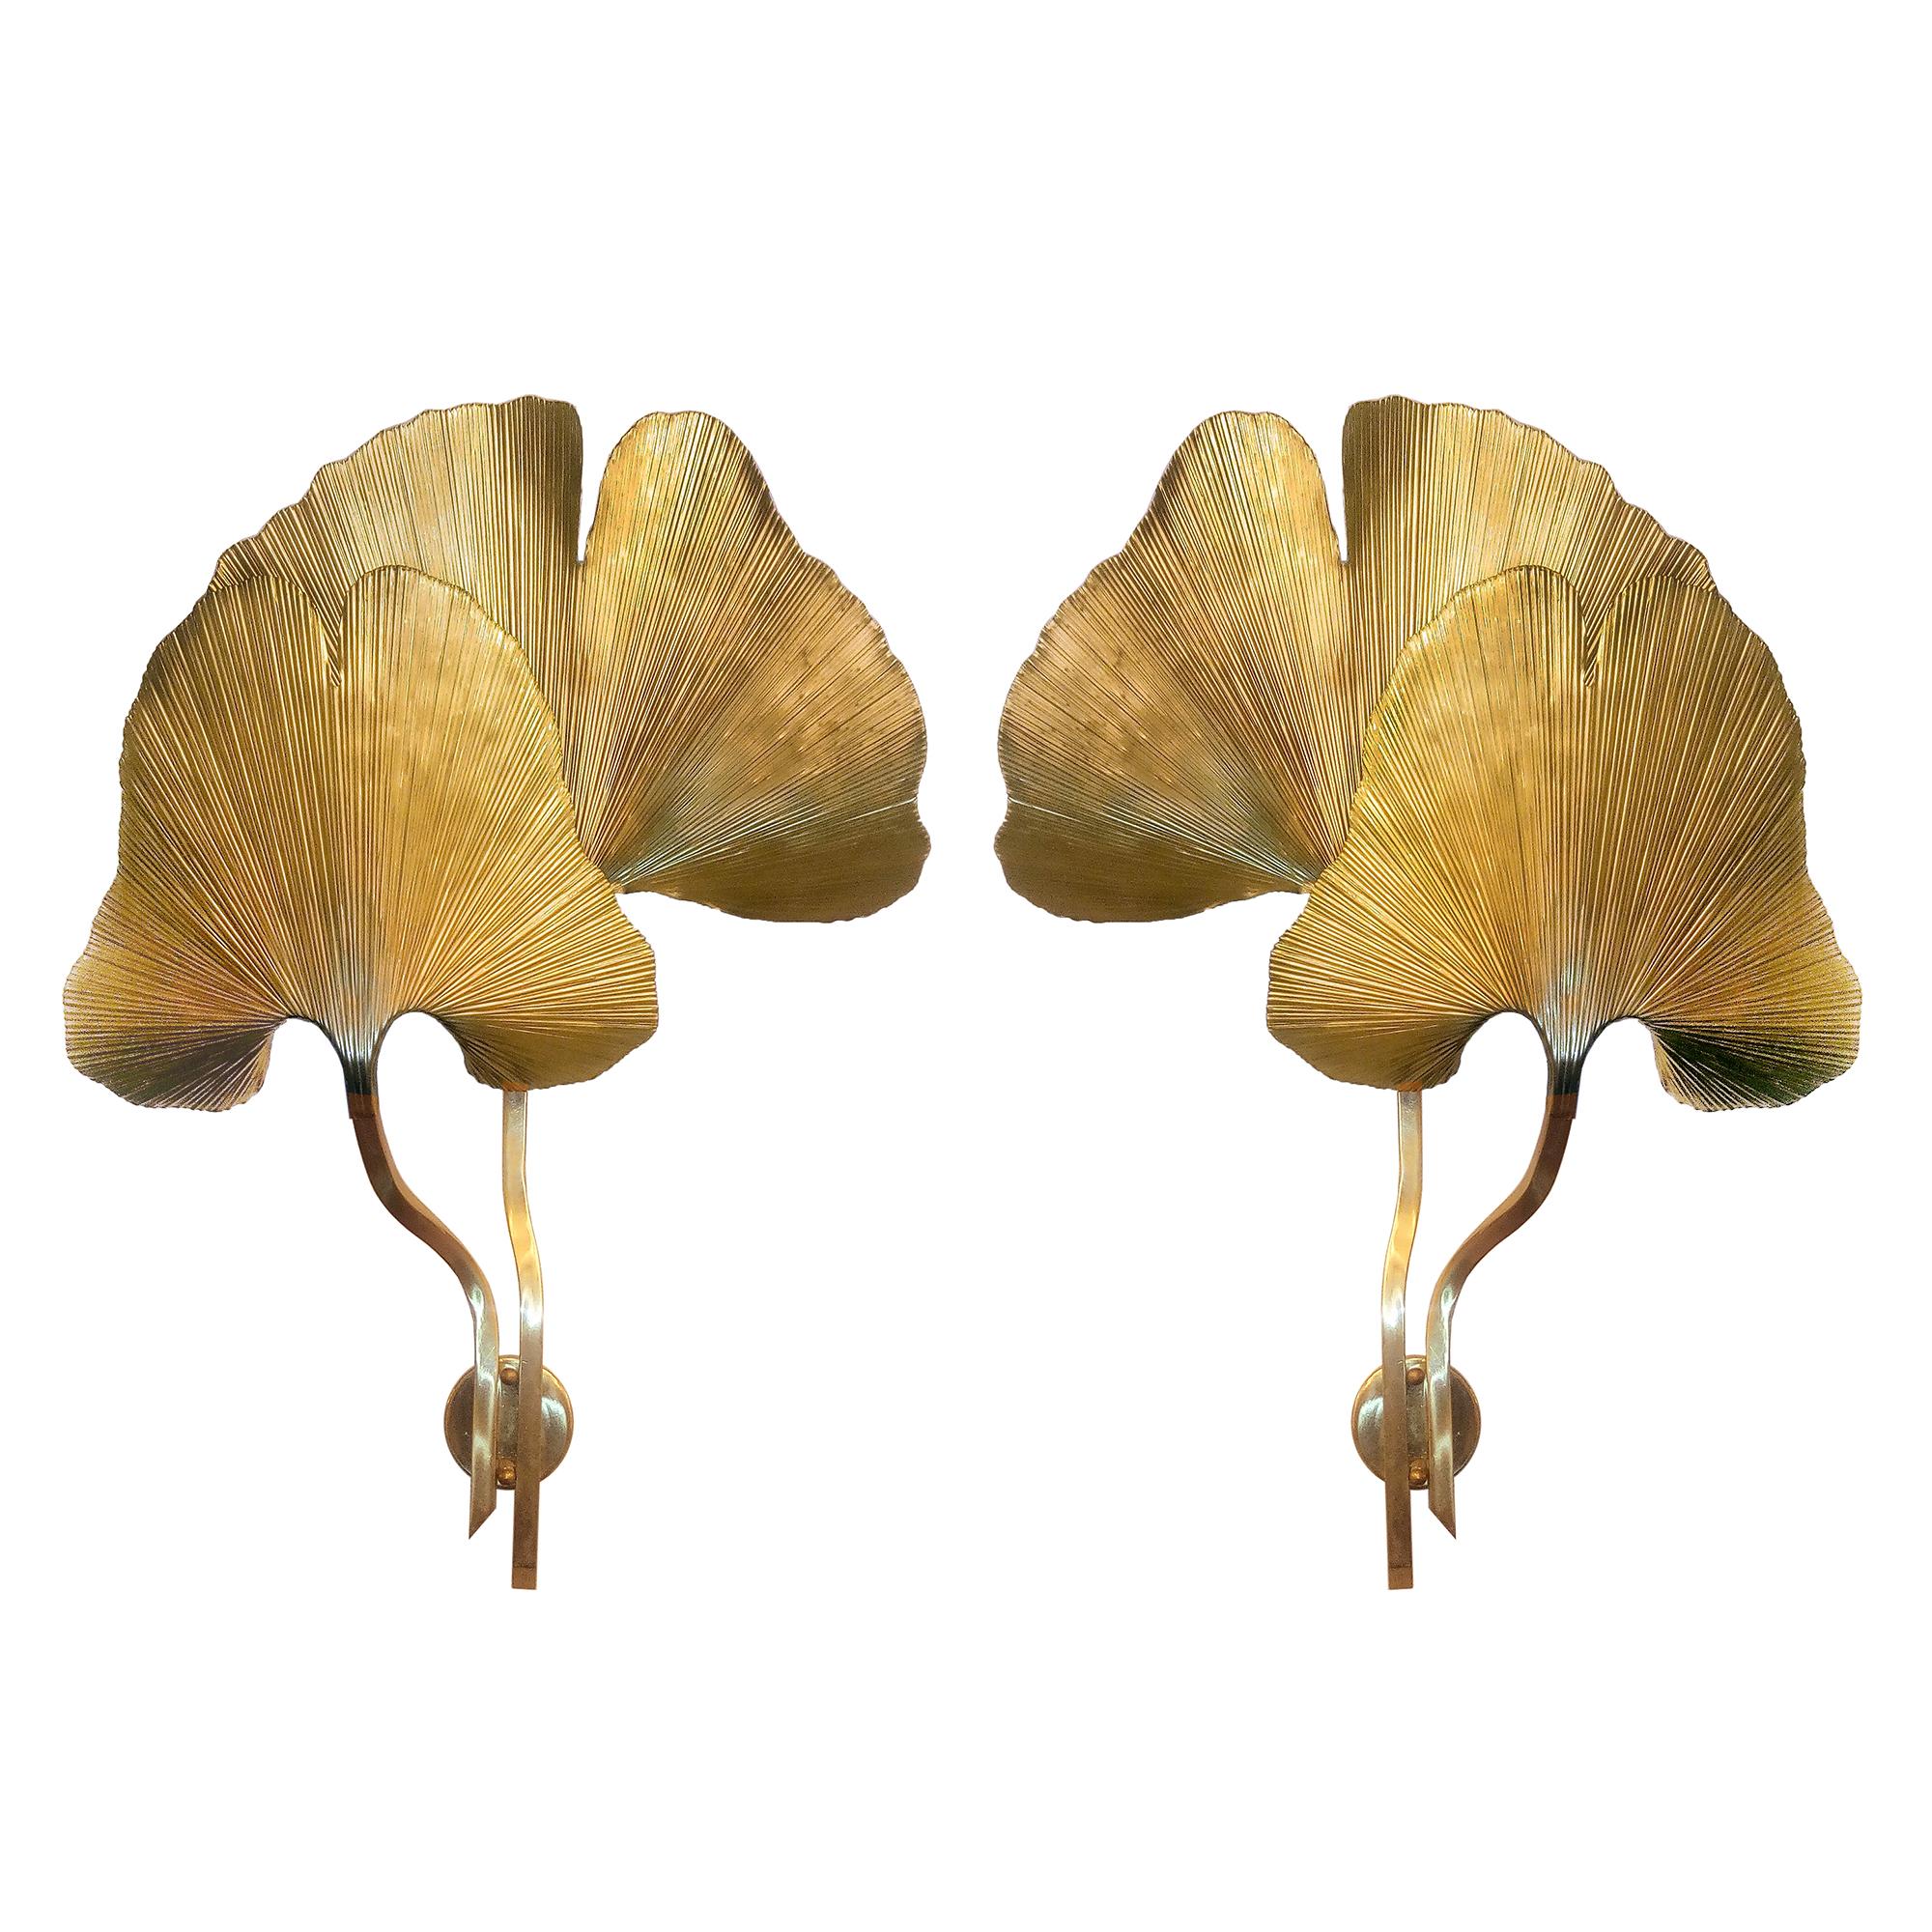 Amazing wall light made by overlapping two brass leaves of ginkgo. Organic shape, this wall lamp could make an eye catcher of your interior. Made to order, can be delivered also in pair, left and right.
Dimensions: circa 55 x 75 cm [21.65 x 29.52